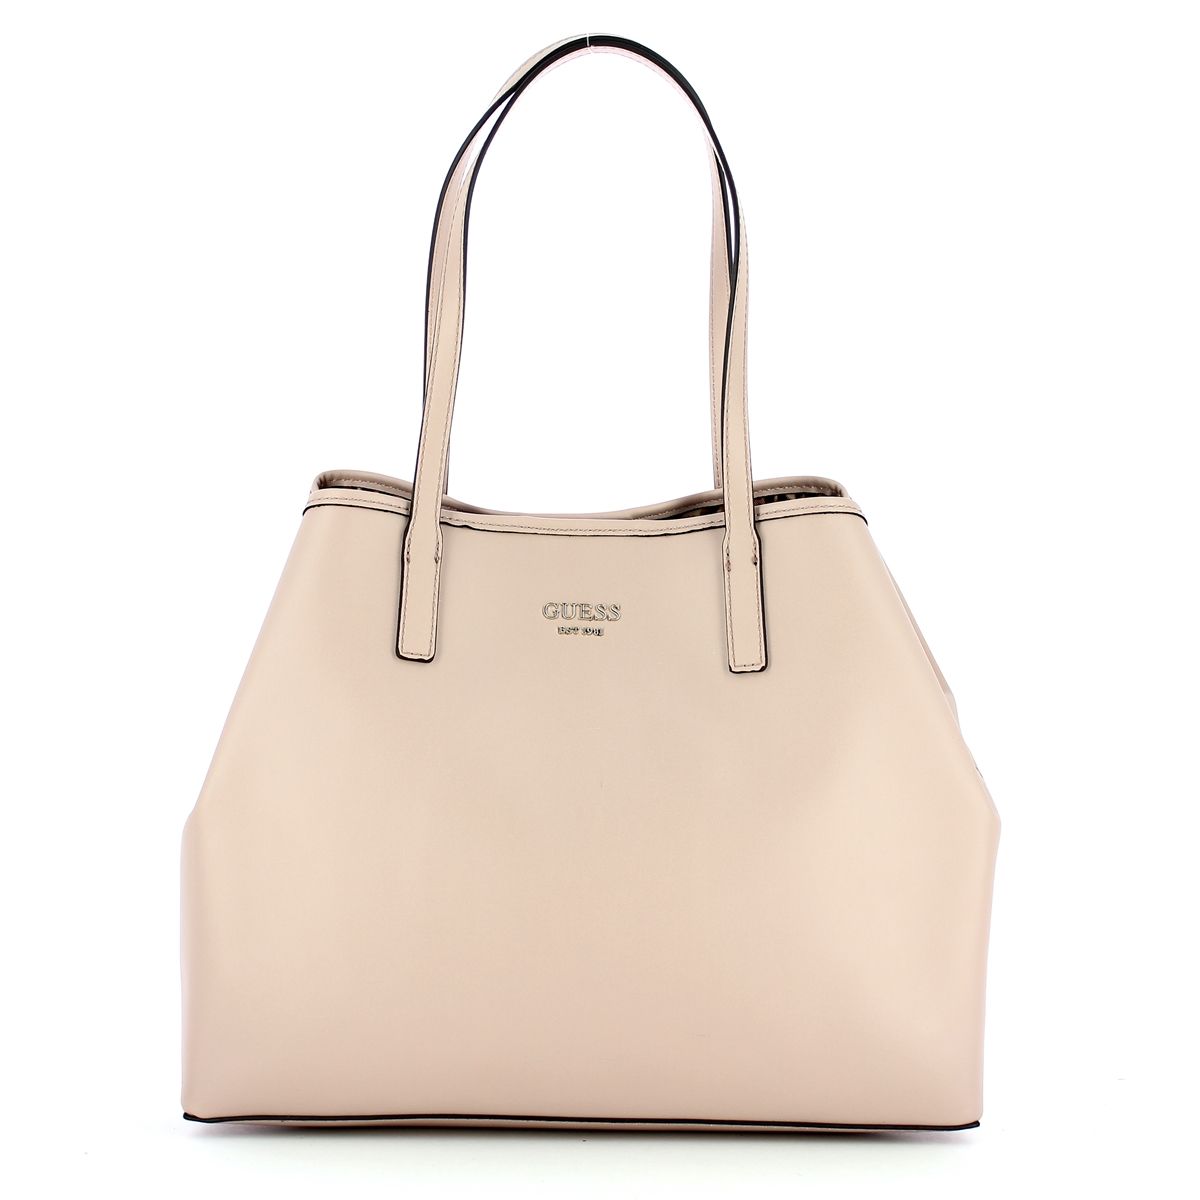 Large Tote Bag Vikky with pochette Guess, spacious everyday shoulderbag made in faux leather, with a soft silhouette. Keep all items safe in the zippered maxi pouch.